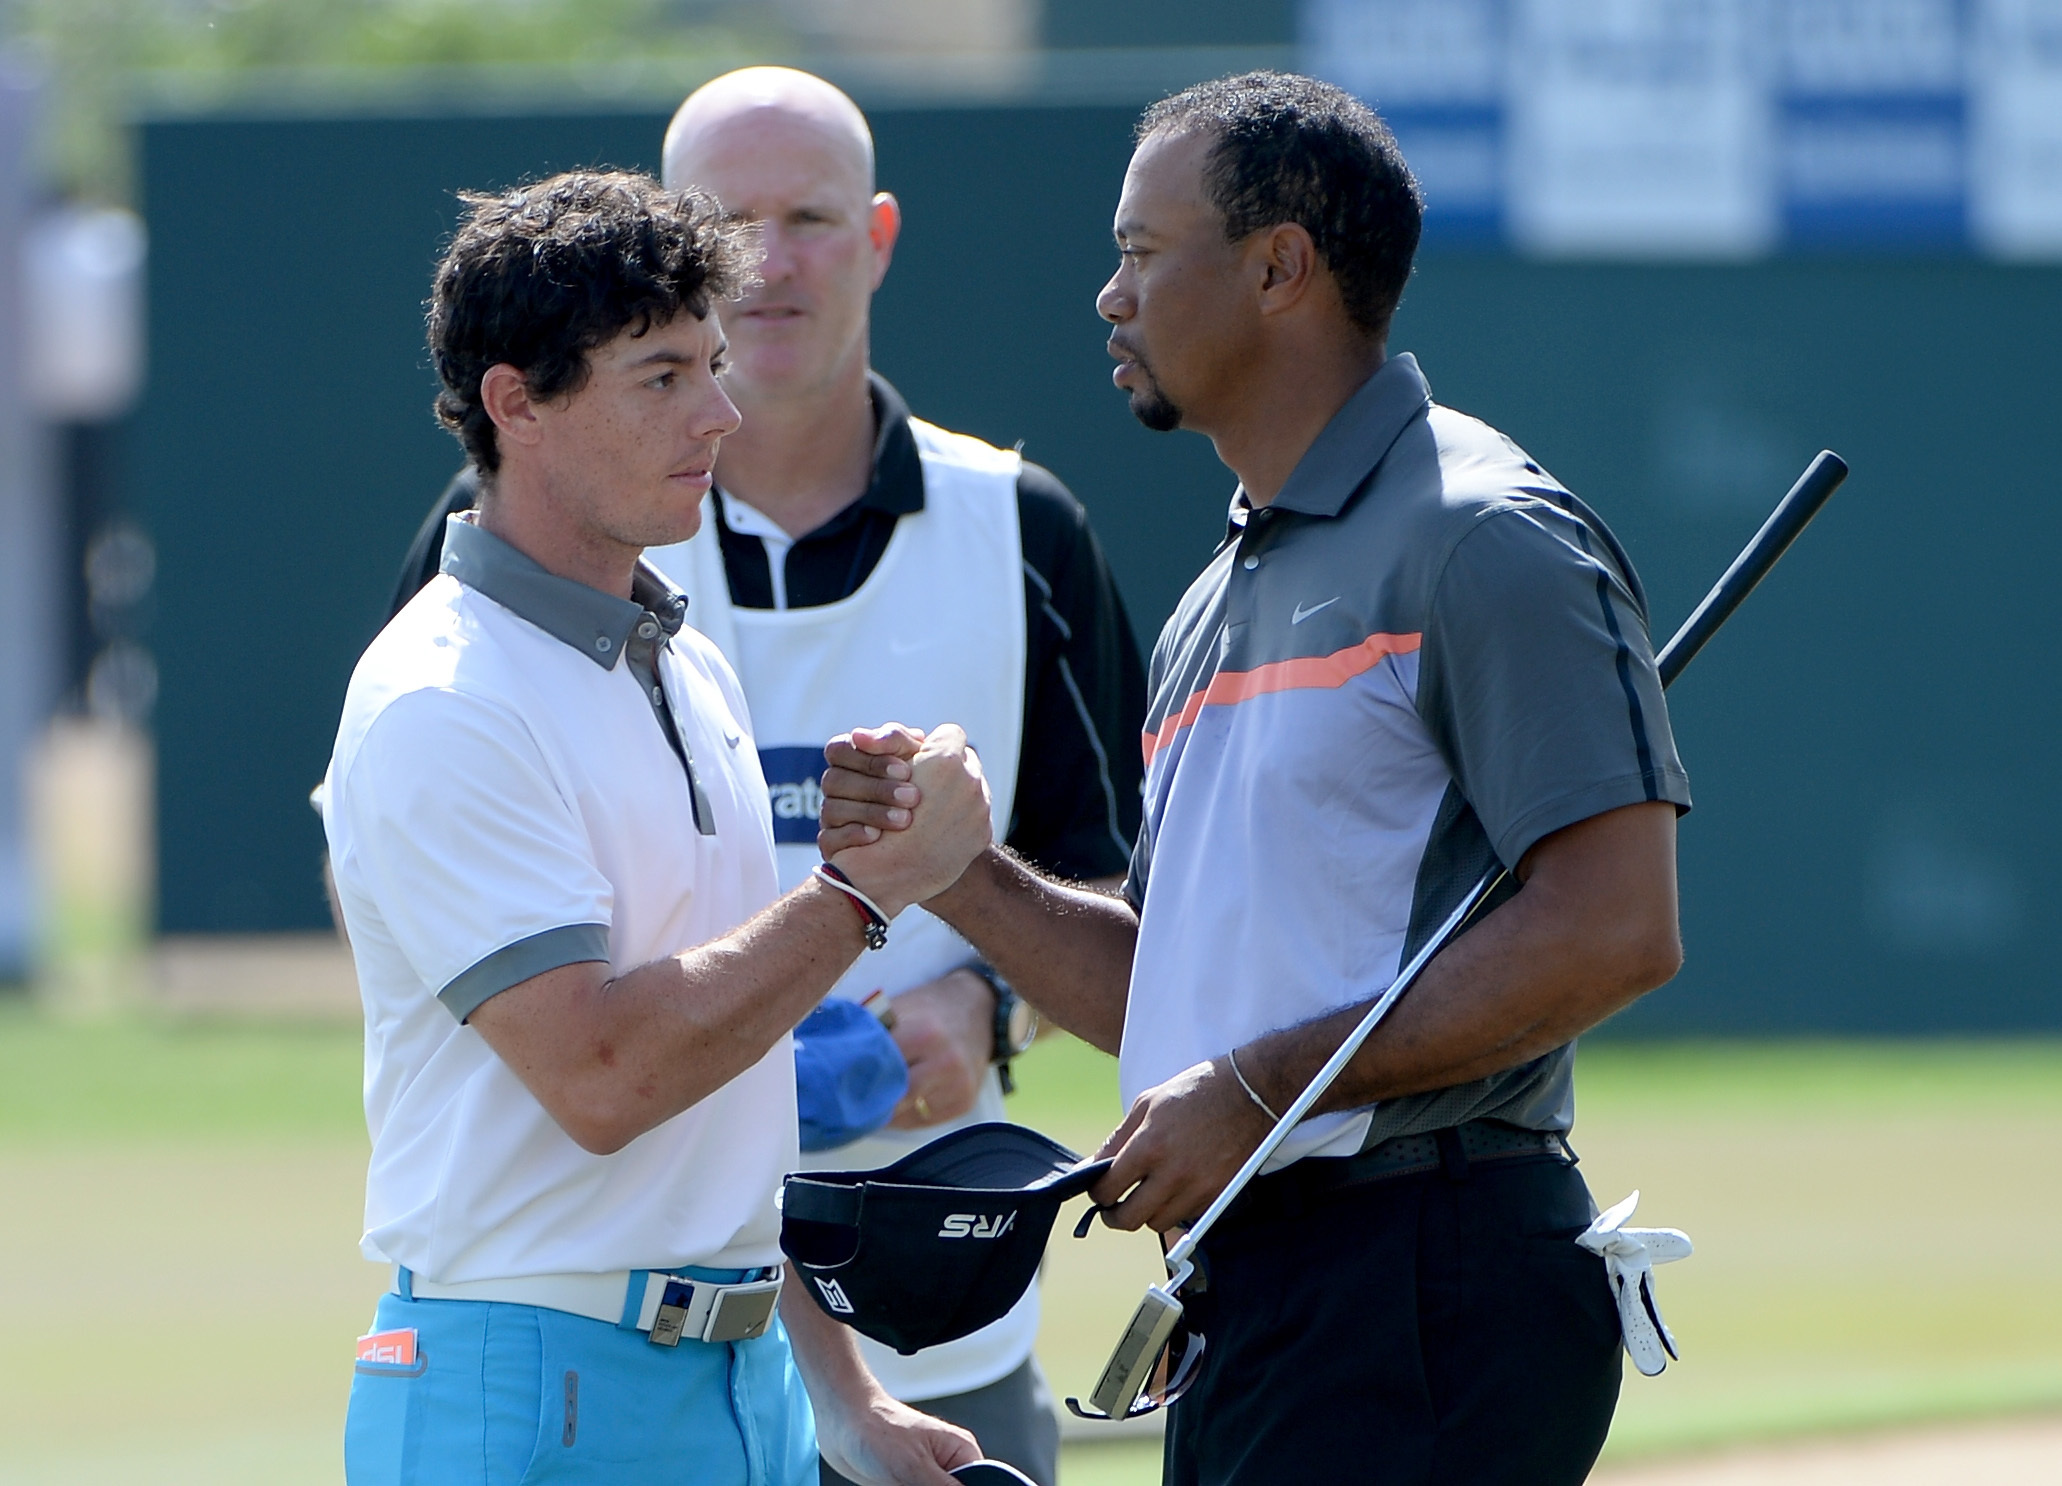 Rory McIlroy has "spent some time" with Tiger Woods during the American's  latest surgery rehab.